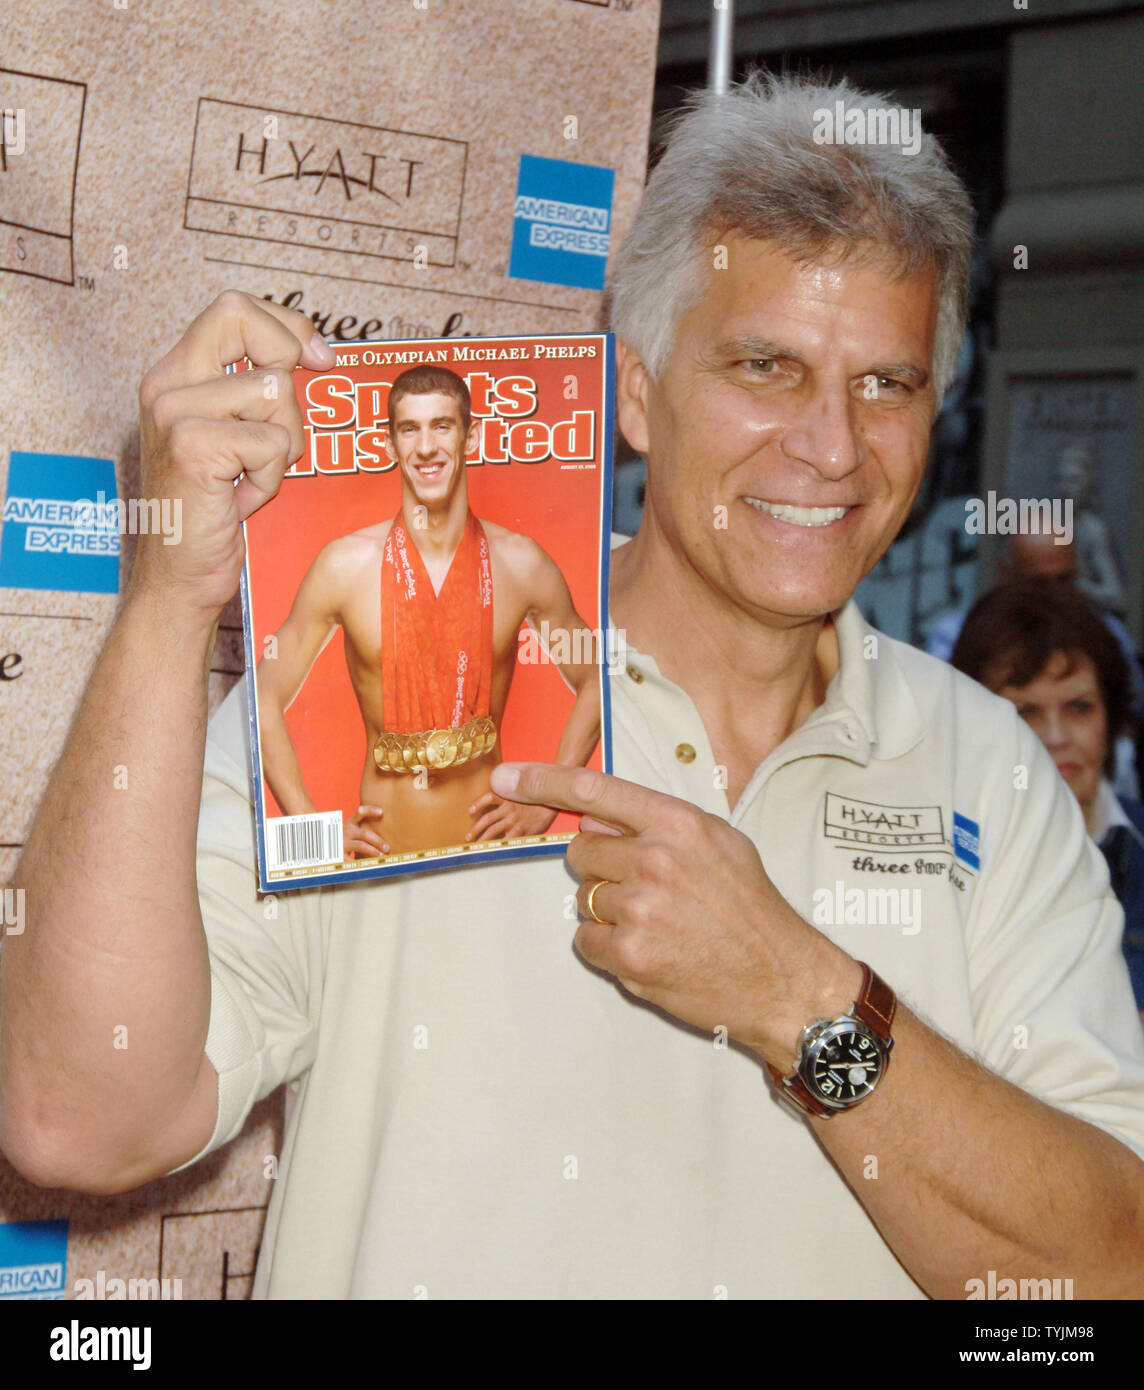 Olympic swimming champion Mark Spitz admires the cover of Sports Illustrated  magazine featuring Michael Phelps whose 8 gold medal wins at the Bejing China 2008 Olympics finally broke Spitz 1972 record of 7 gold. Spitz was at a promotional gig for the Grand Hyatt hotel in New York on August 20, 2008.   (UPI Photo/Ezio Petersen) Stock Photo